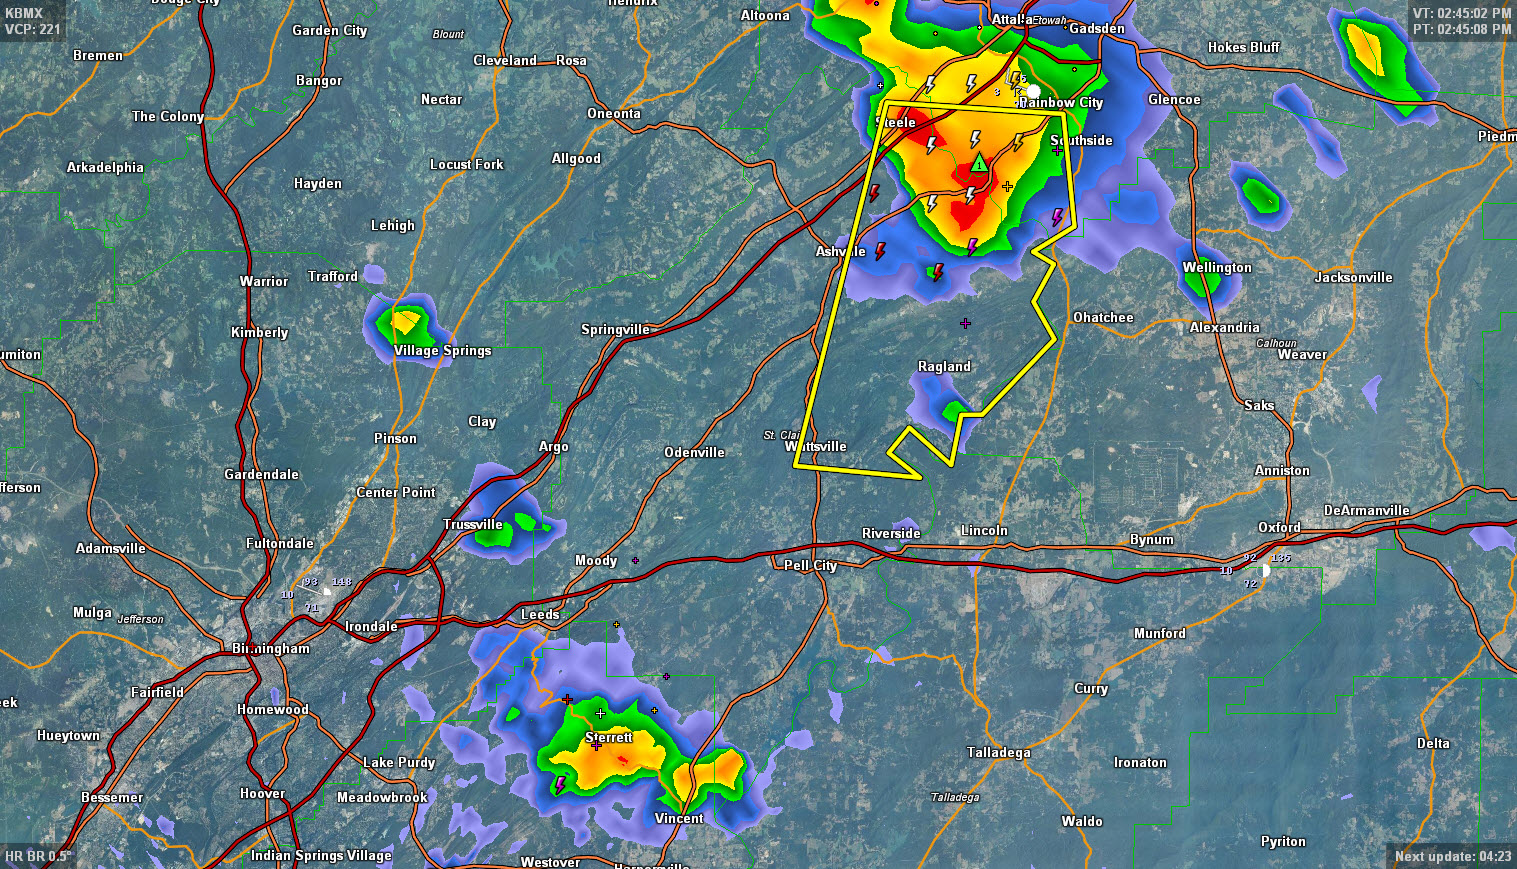 Severe Thunderstorm Warning – Parts of St. Clair/Etowah Until 3:30 p.m.